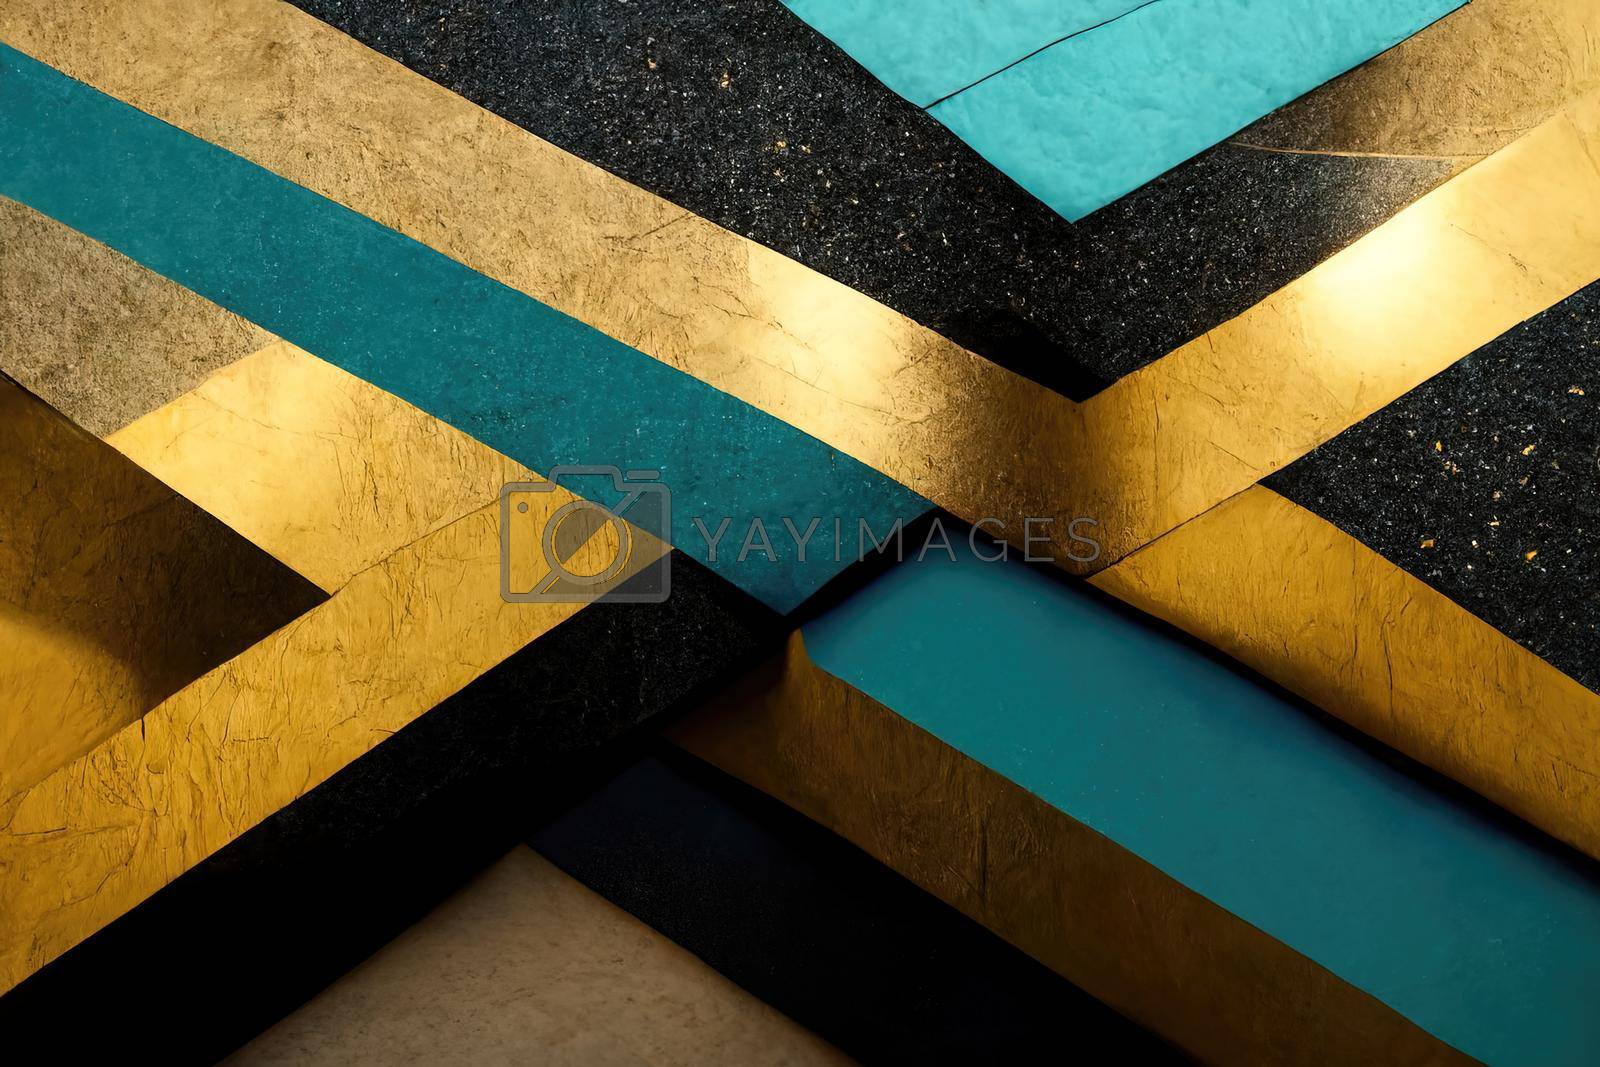 Royalty free image of abstract black and gold minimalist background, 3d illustration by Farcas